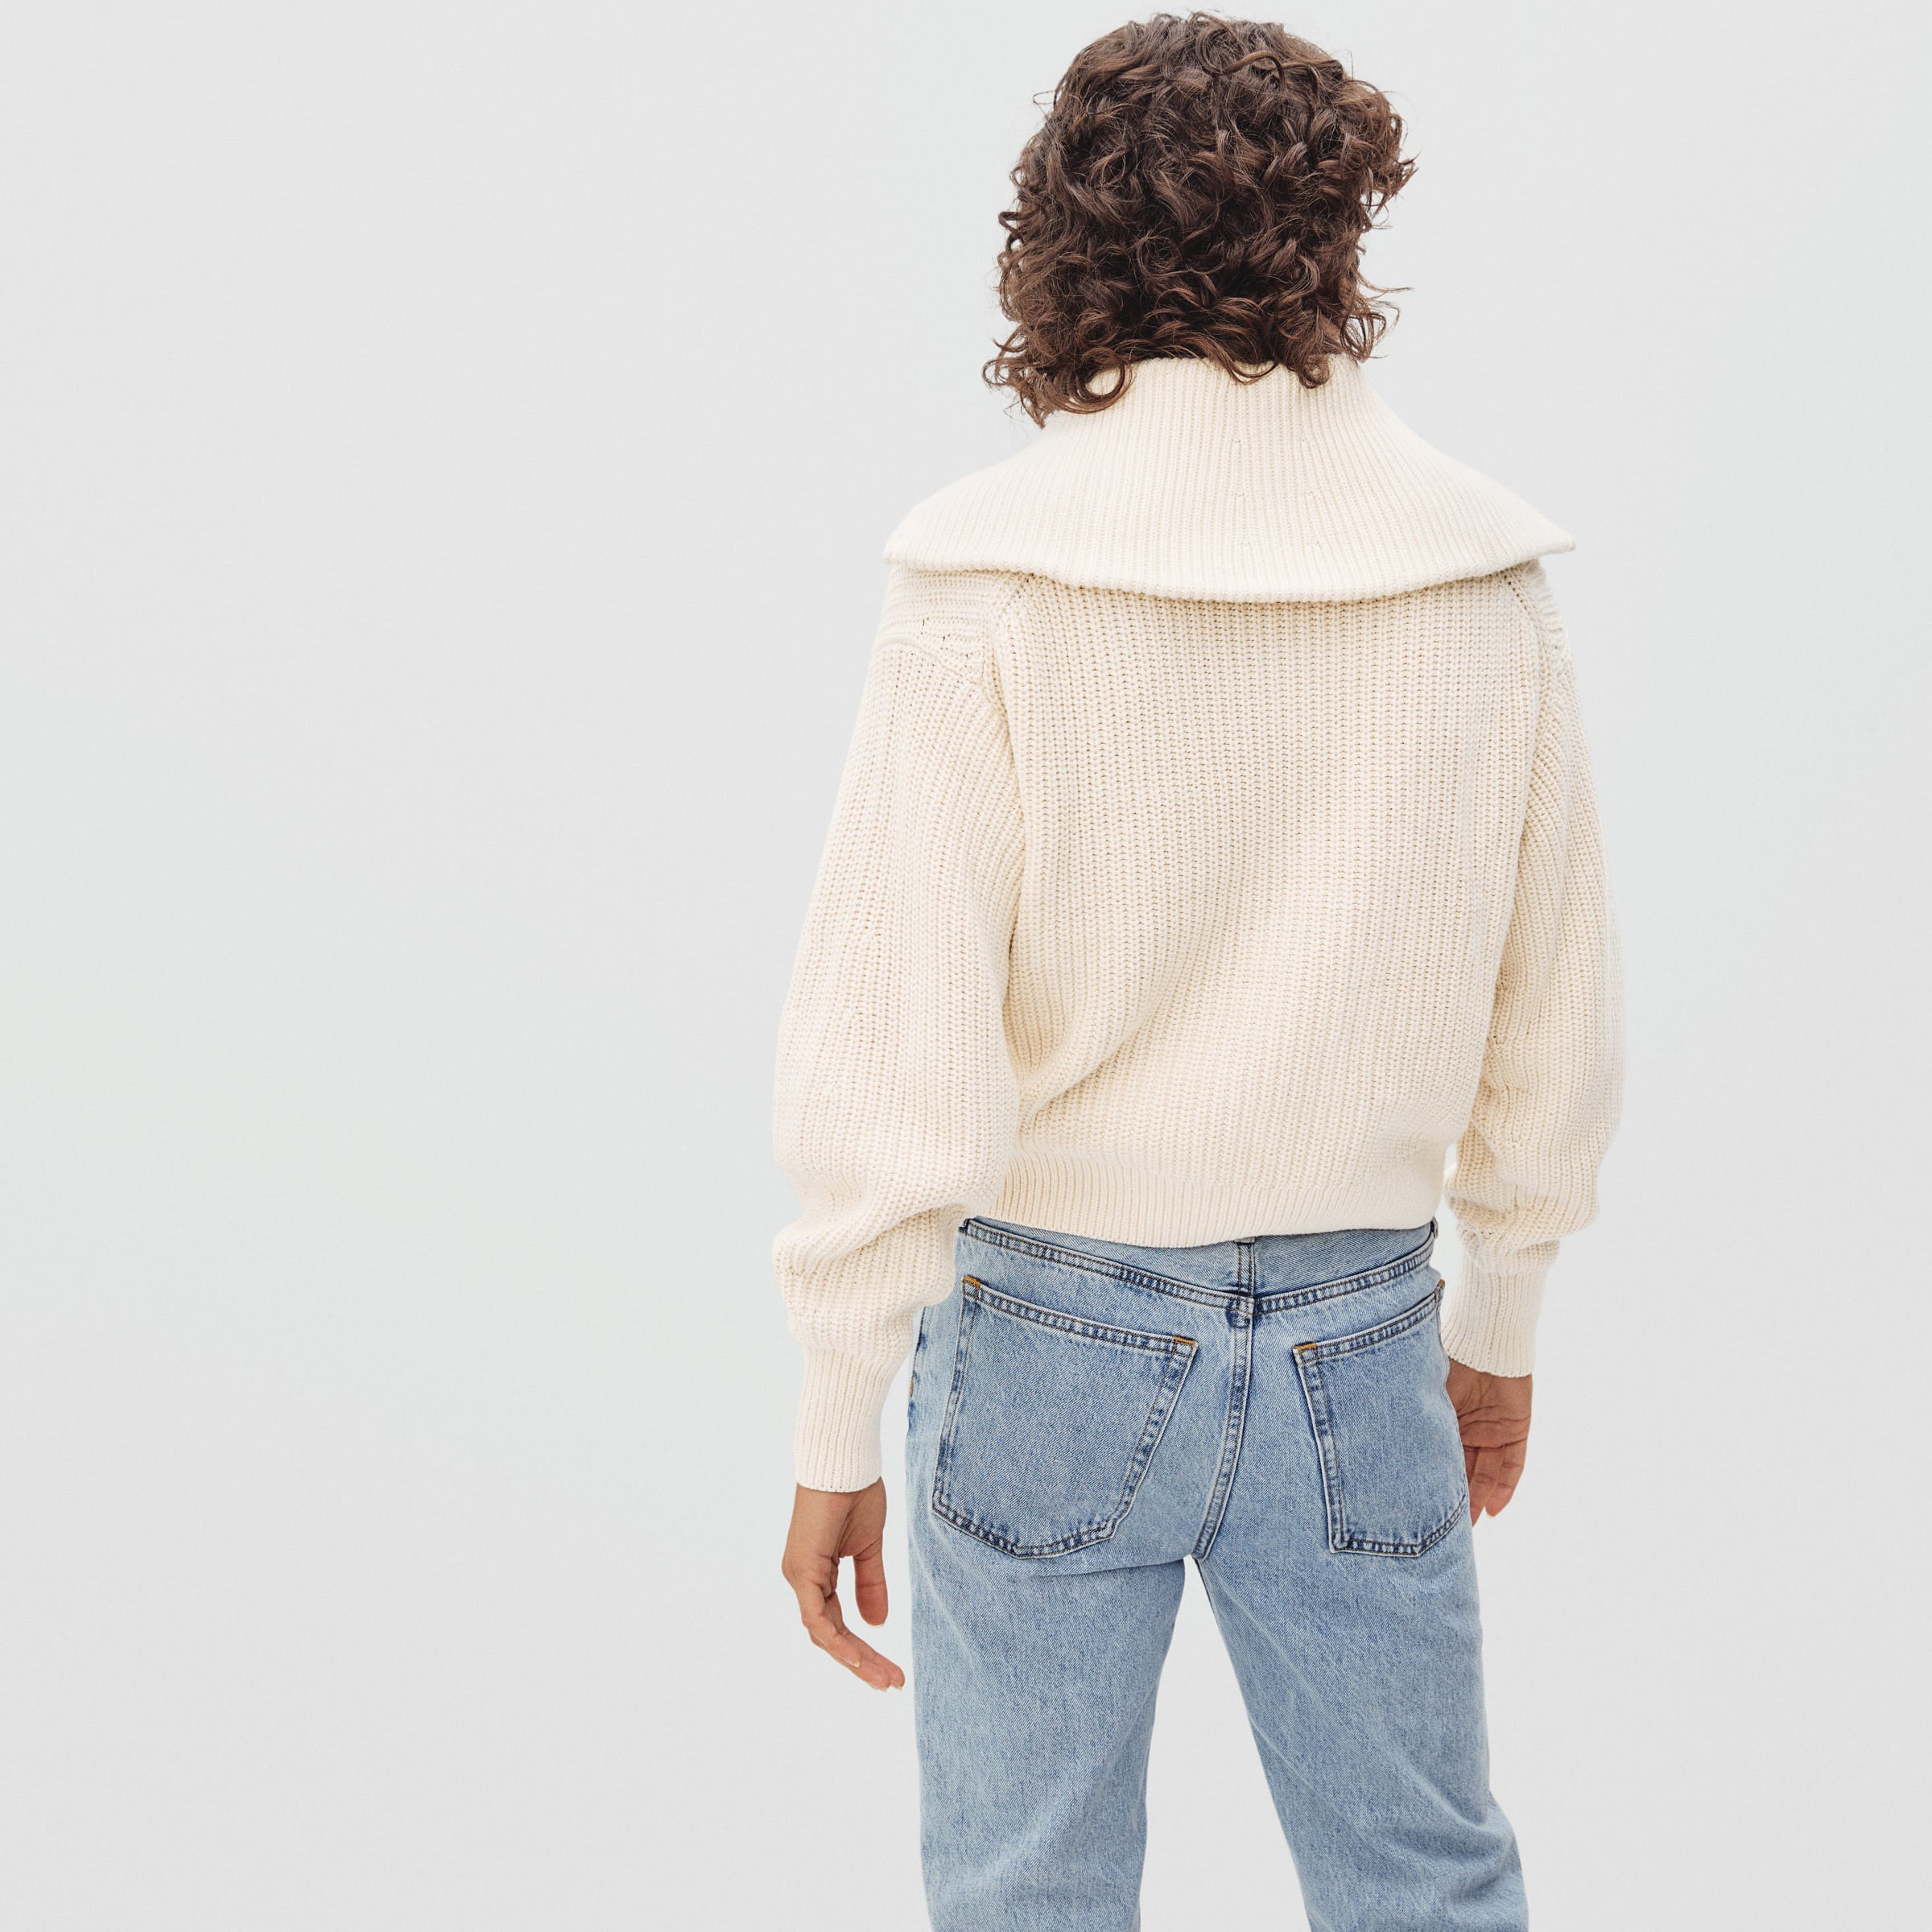 Winter Essentials from Everlane and Shopbop - Jeans and a Teacup